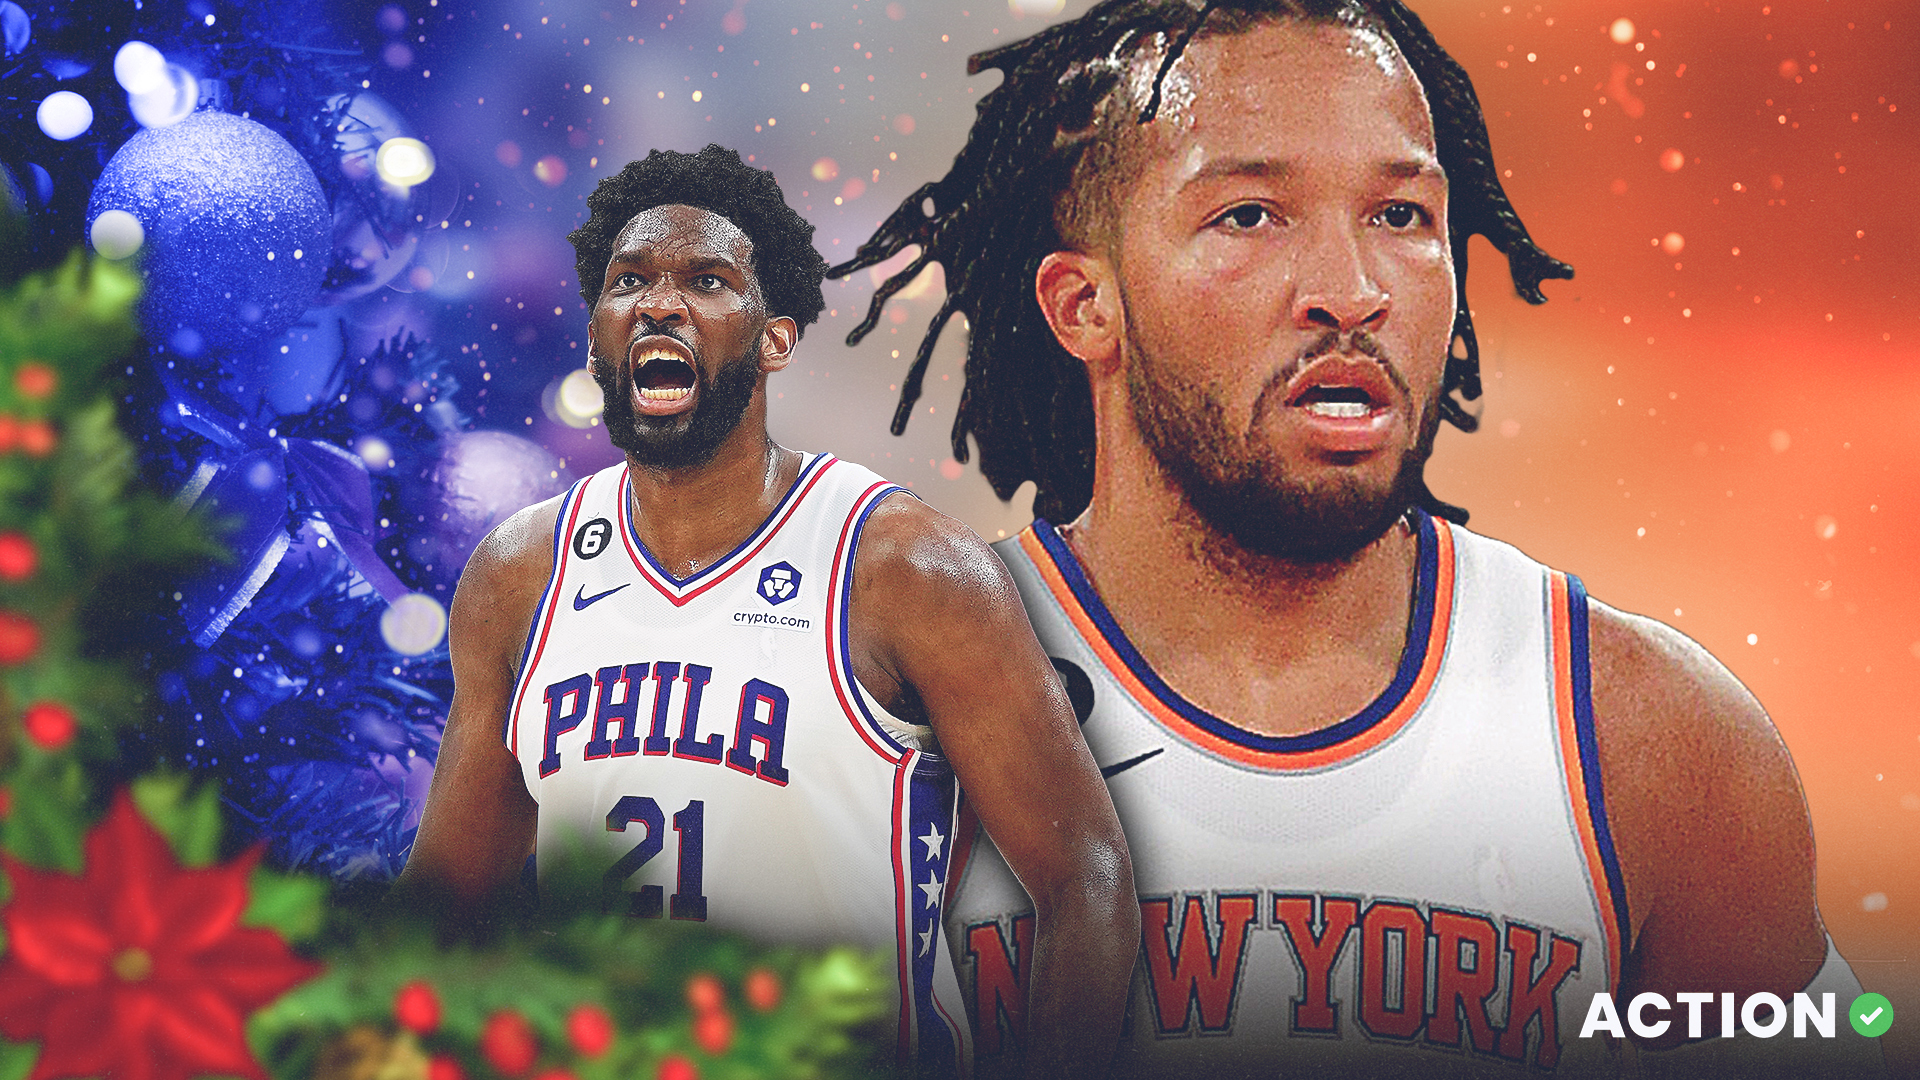 76ers vs. Knicks Odds & Picks: Spread, Total, Player Prop & More Bets for Christmas Day Matchup article feature image